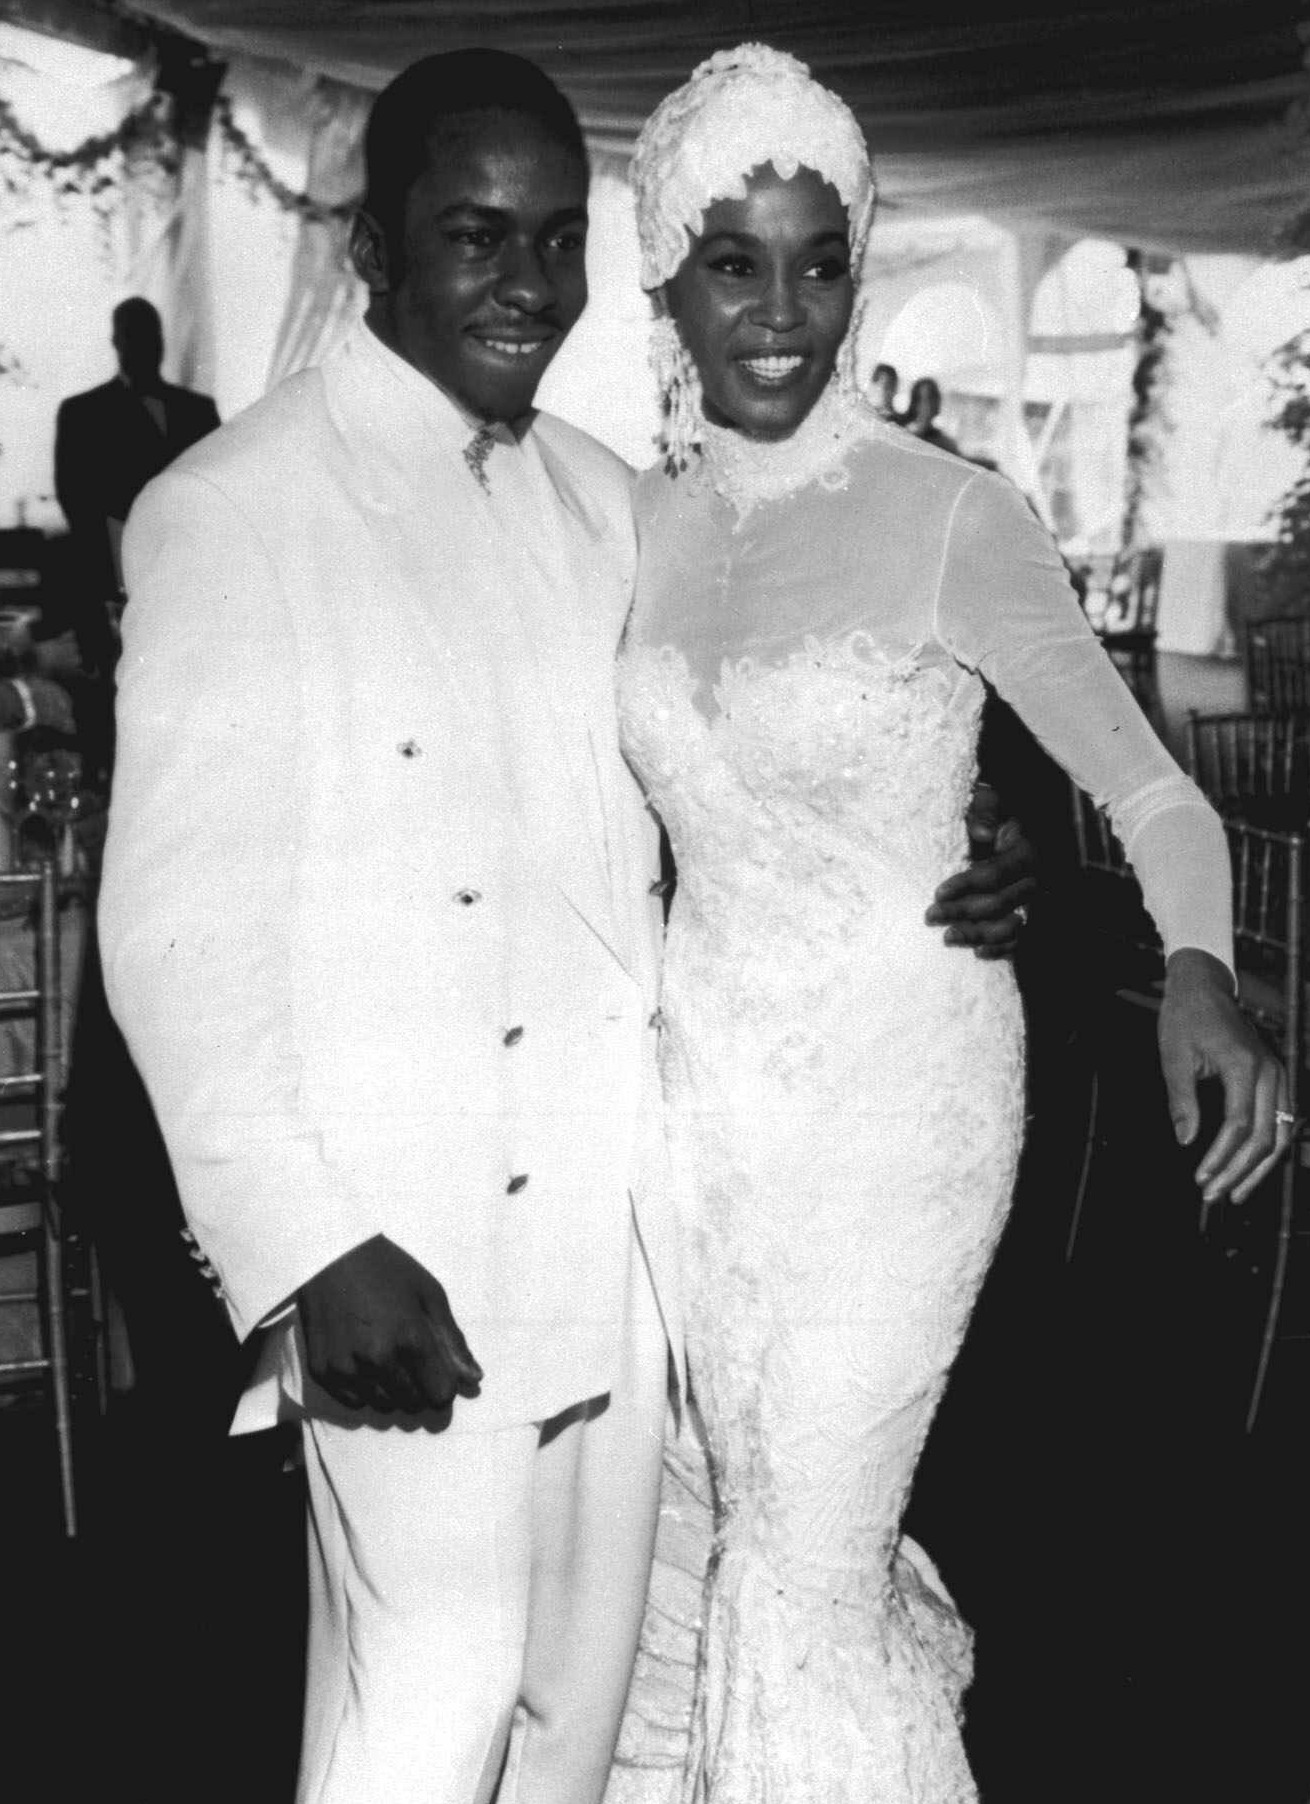 The South African-born Bouwer designed Houston's wedding gown for her 1992 nuptials to Bobby Brown